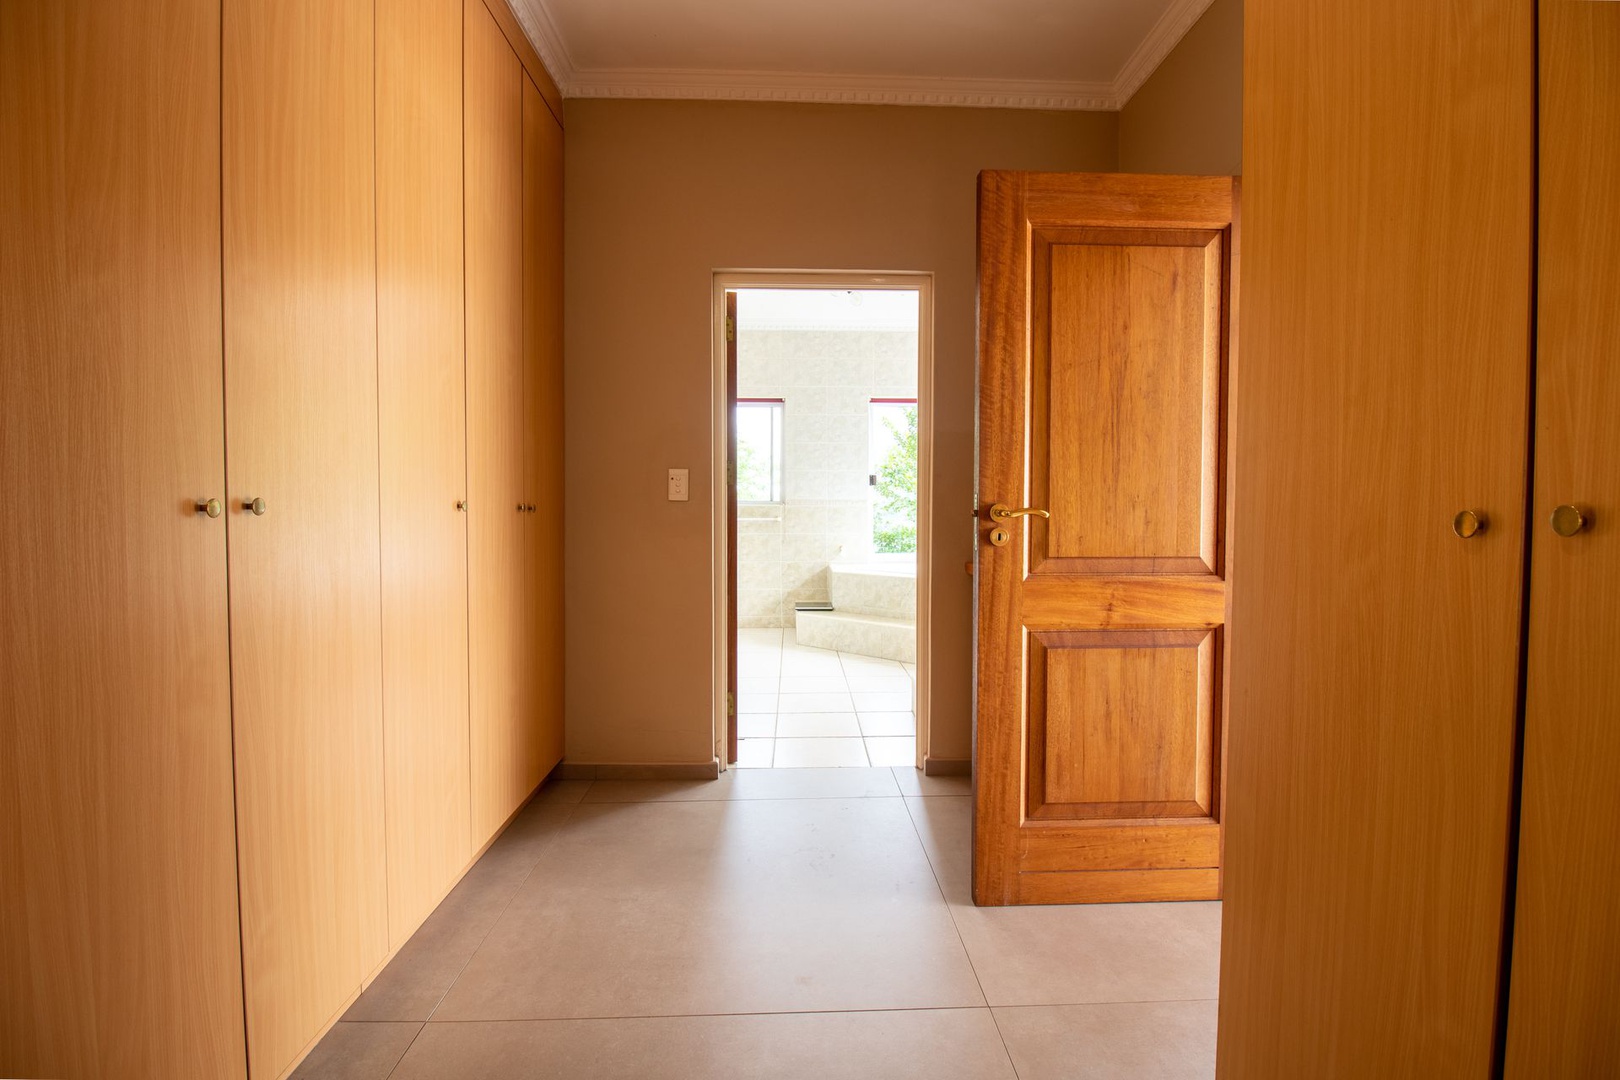 House in Kosmos - Walk in wardrobe area is part of the main bedroom suite